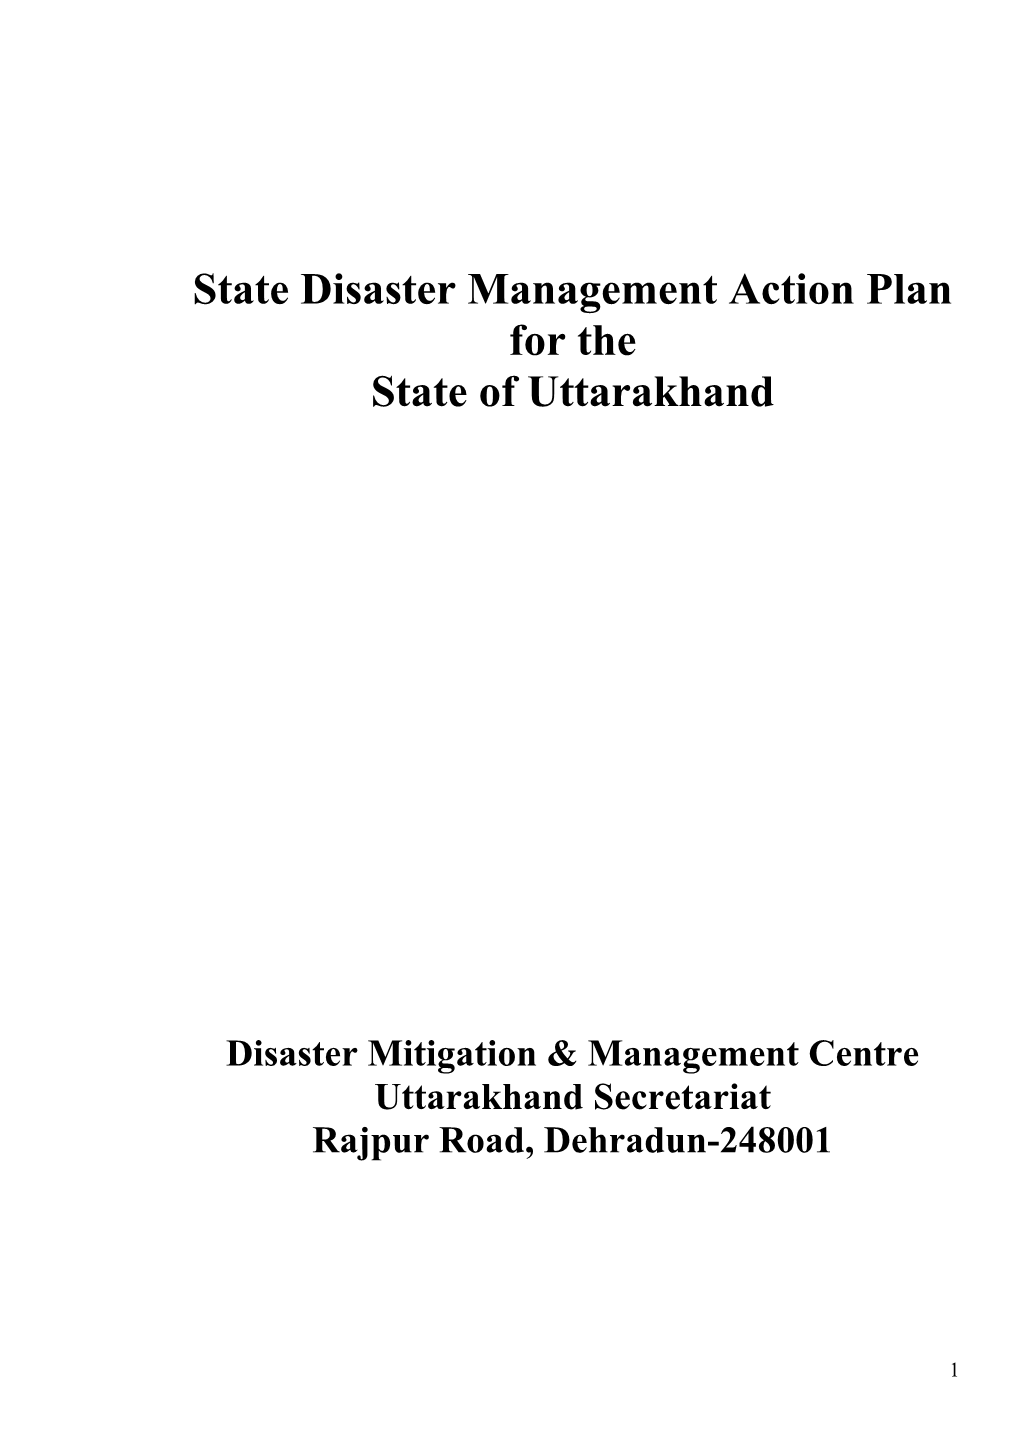 State Disaster Management Action Plan for the State of Uttarakhand